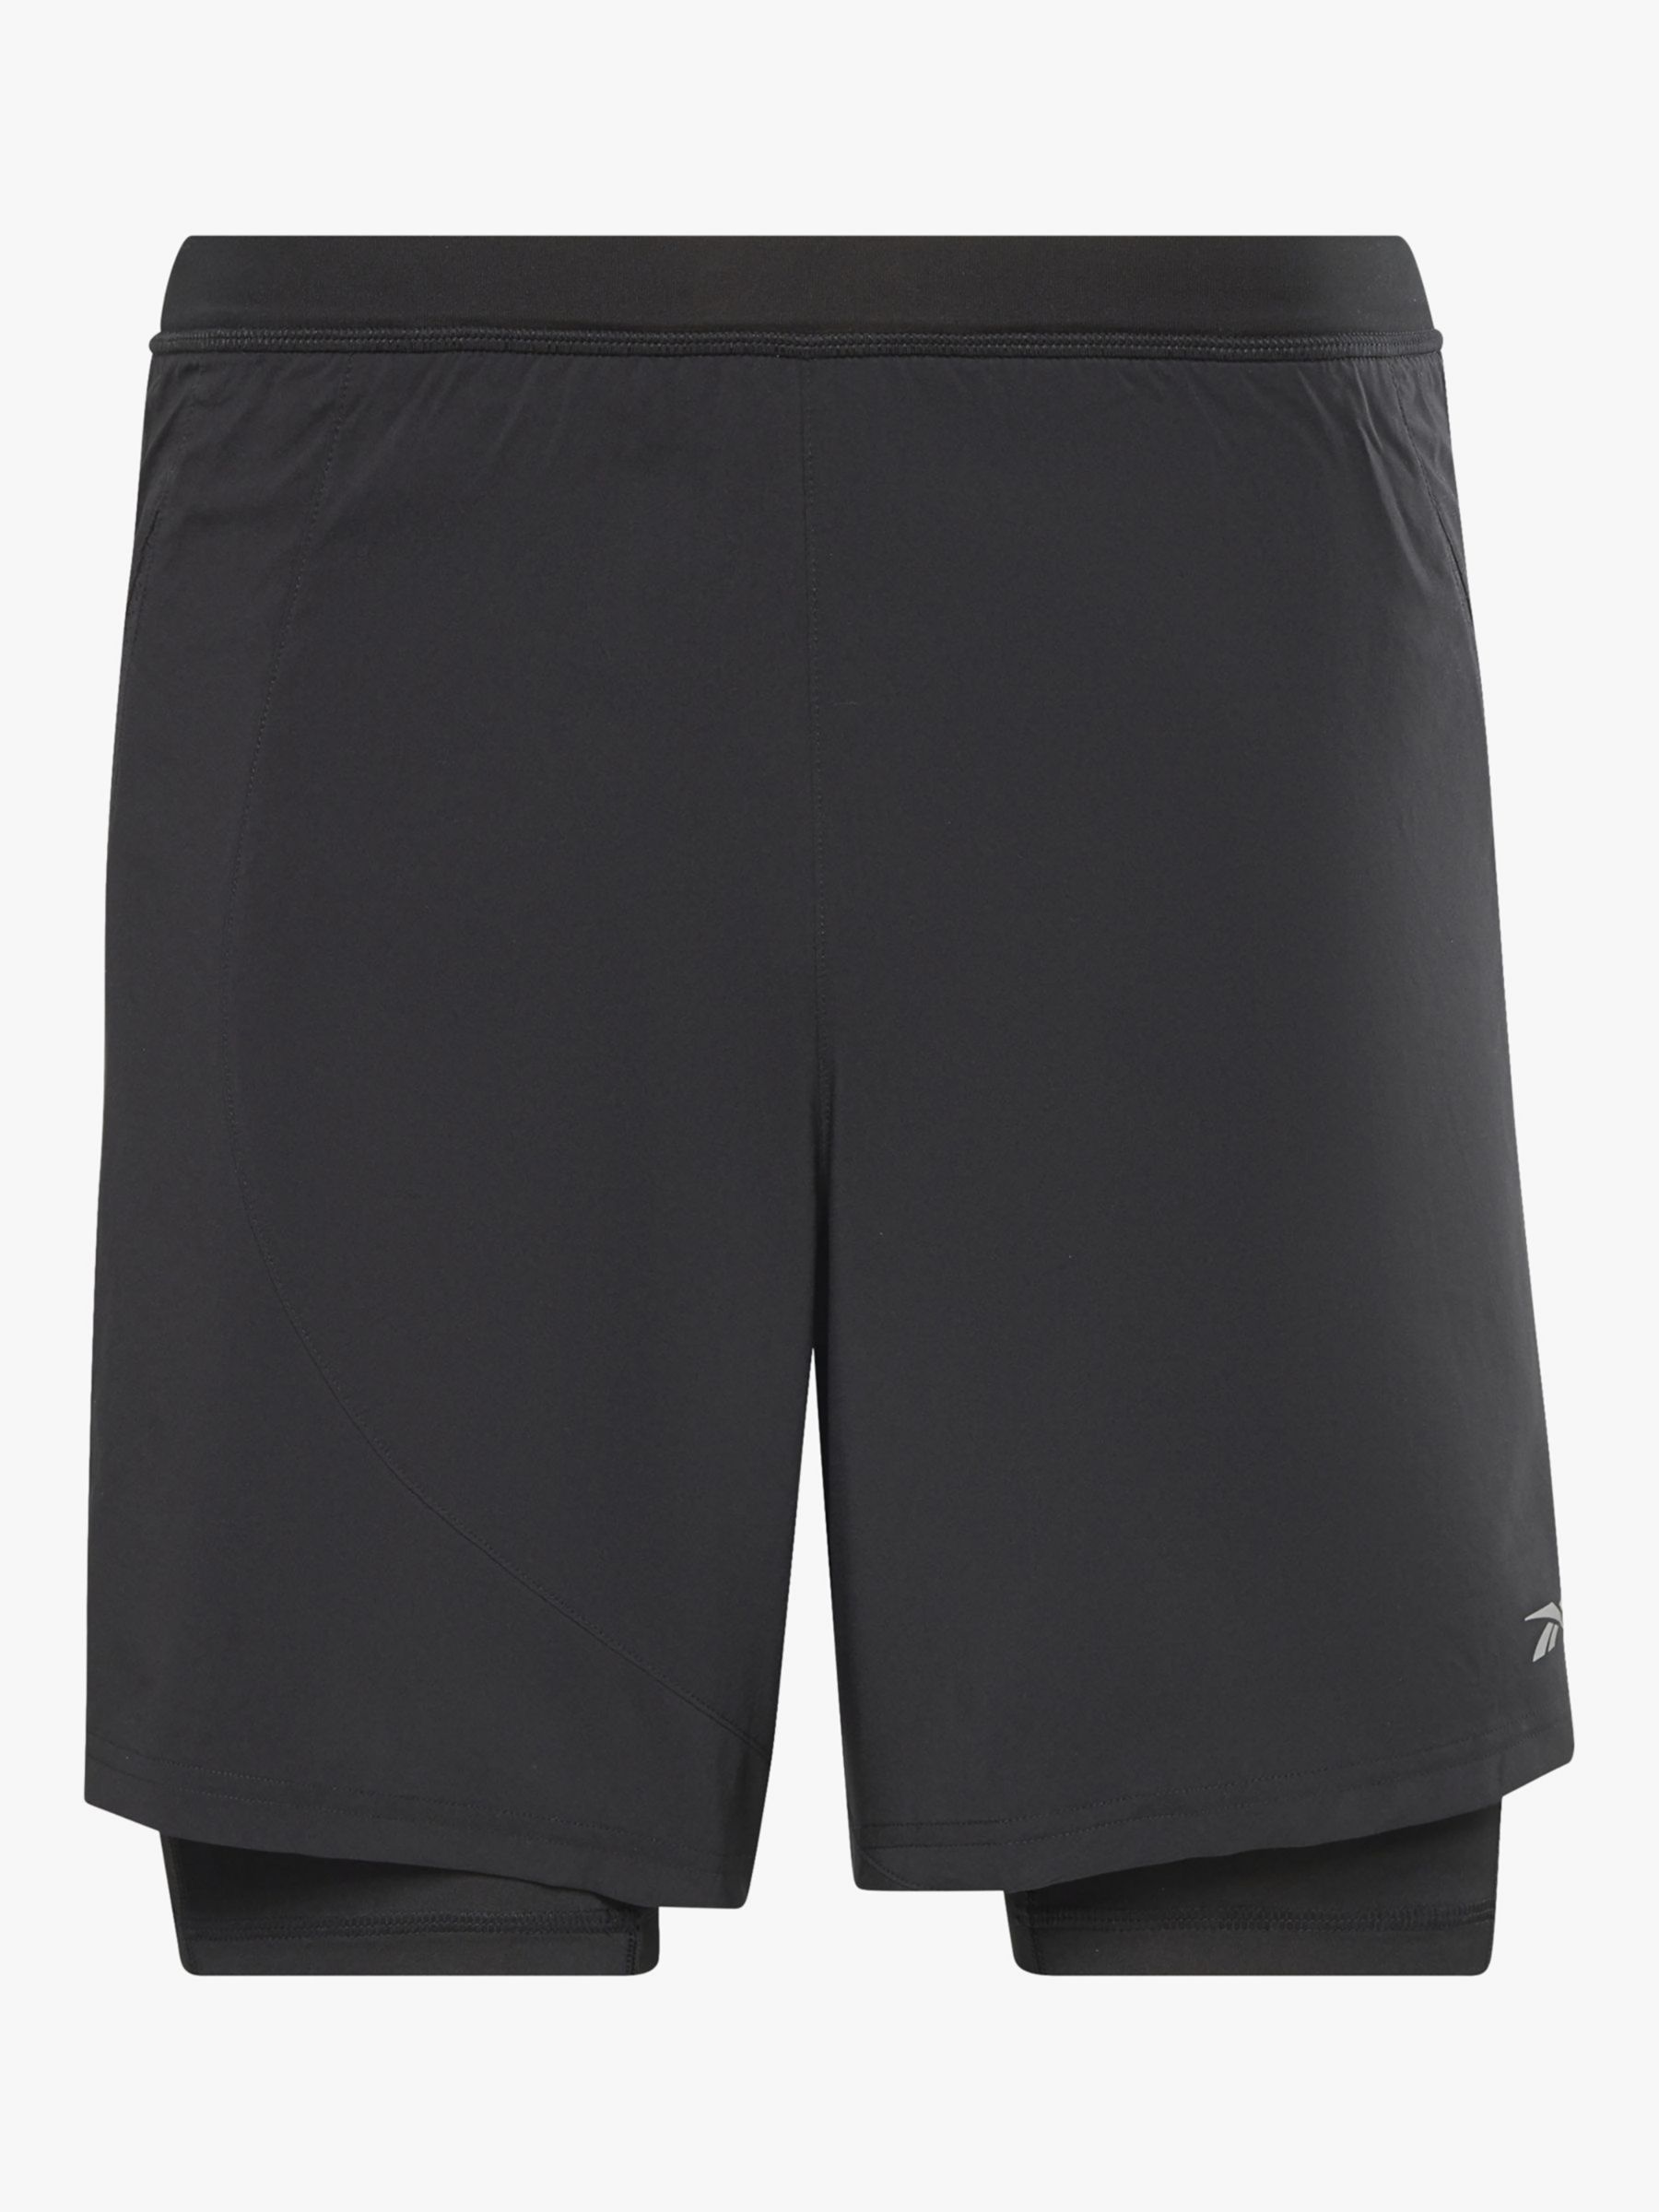 Reebok Two-in-One Running Shorts, Black, S